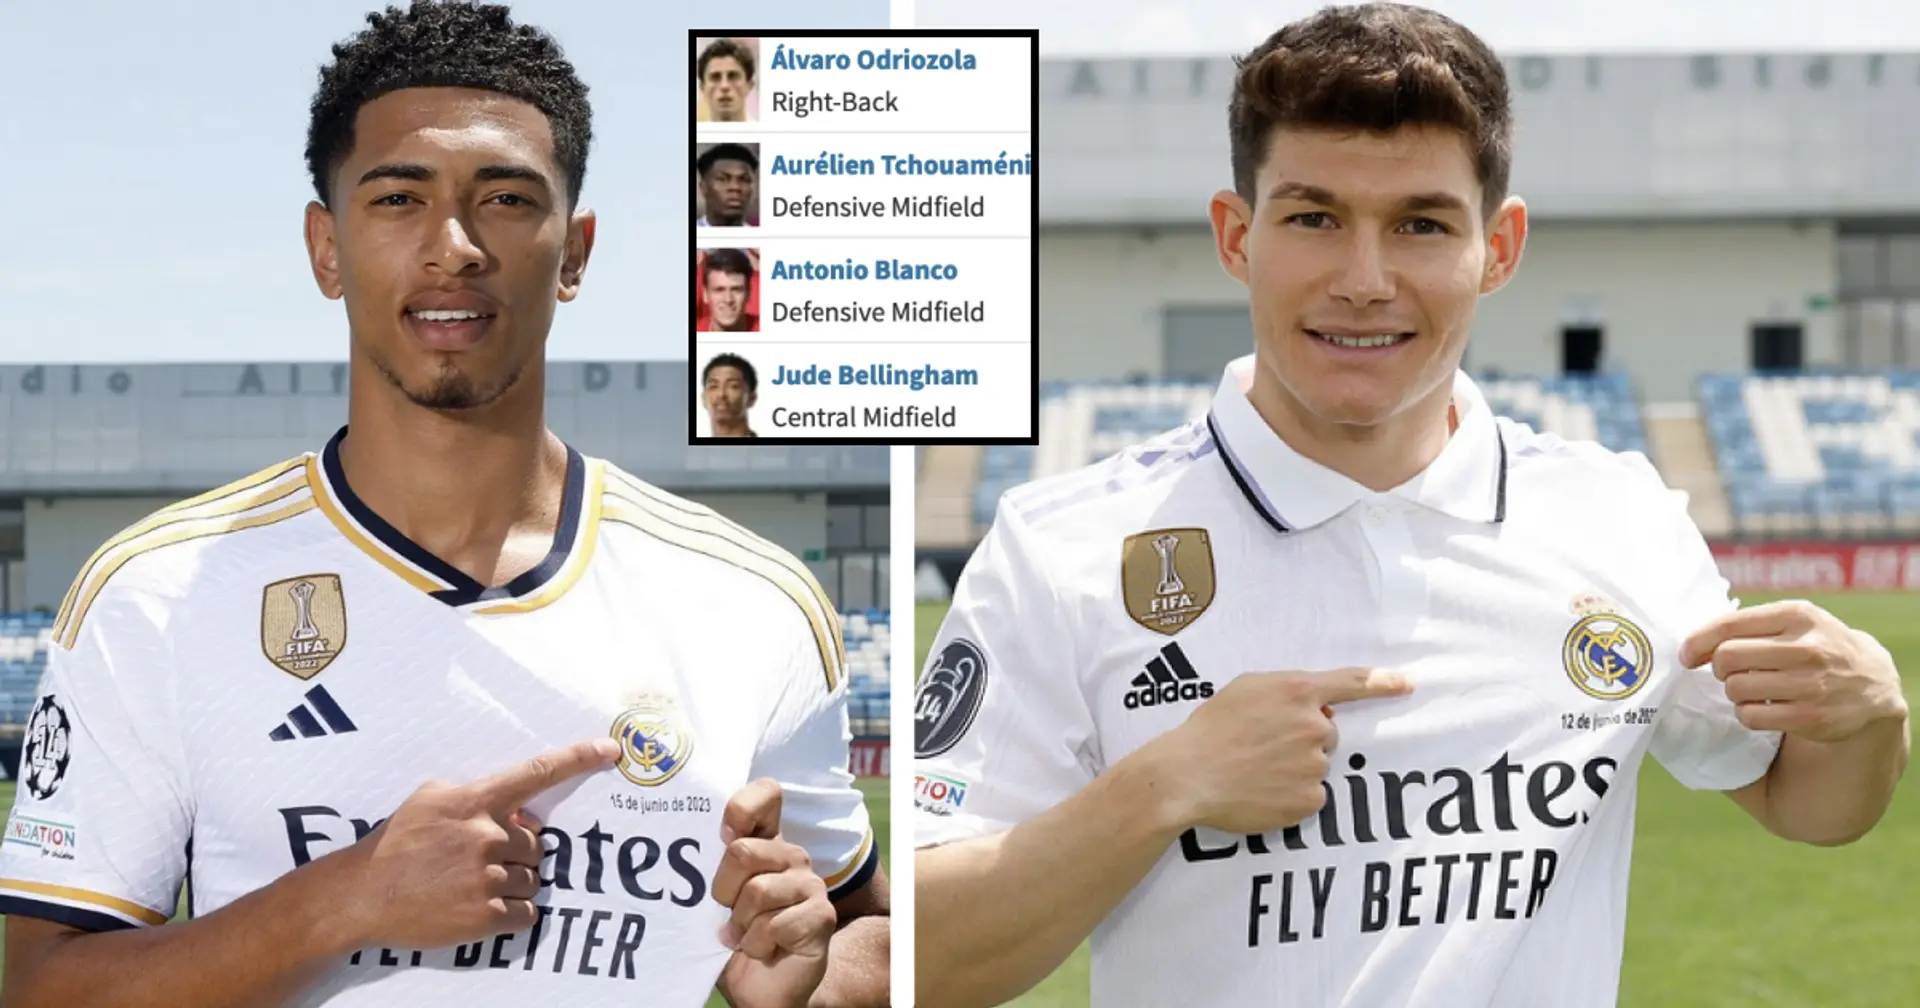 6 players in, 4 out: Real Madrid's full 25-man squad on July 1 after contracts expire